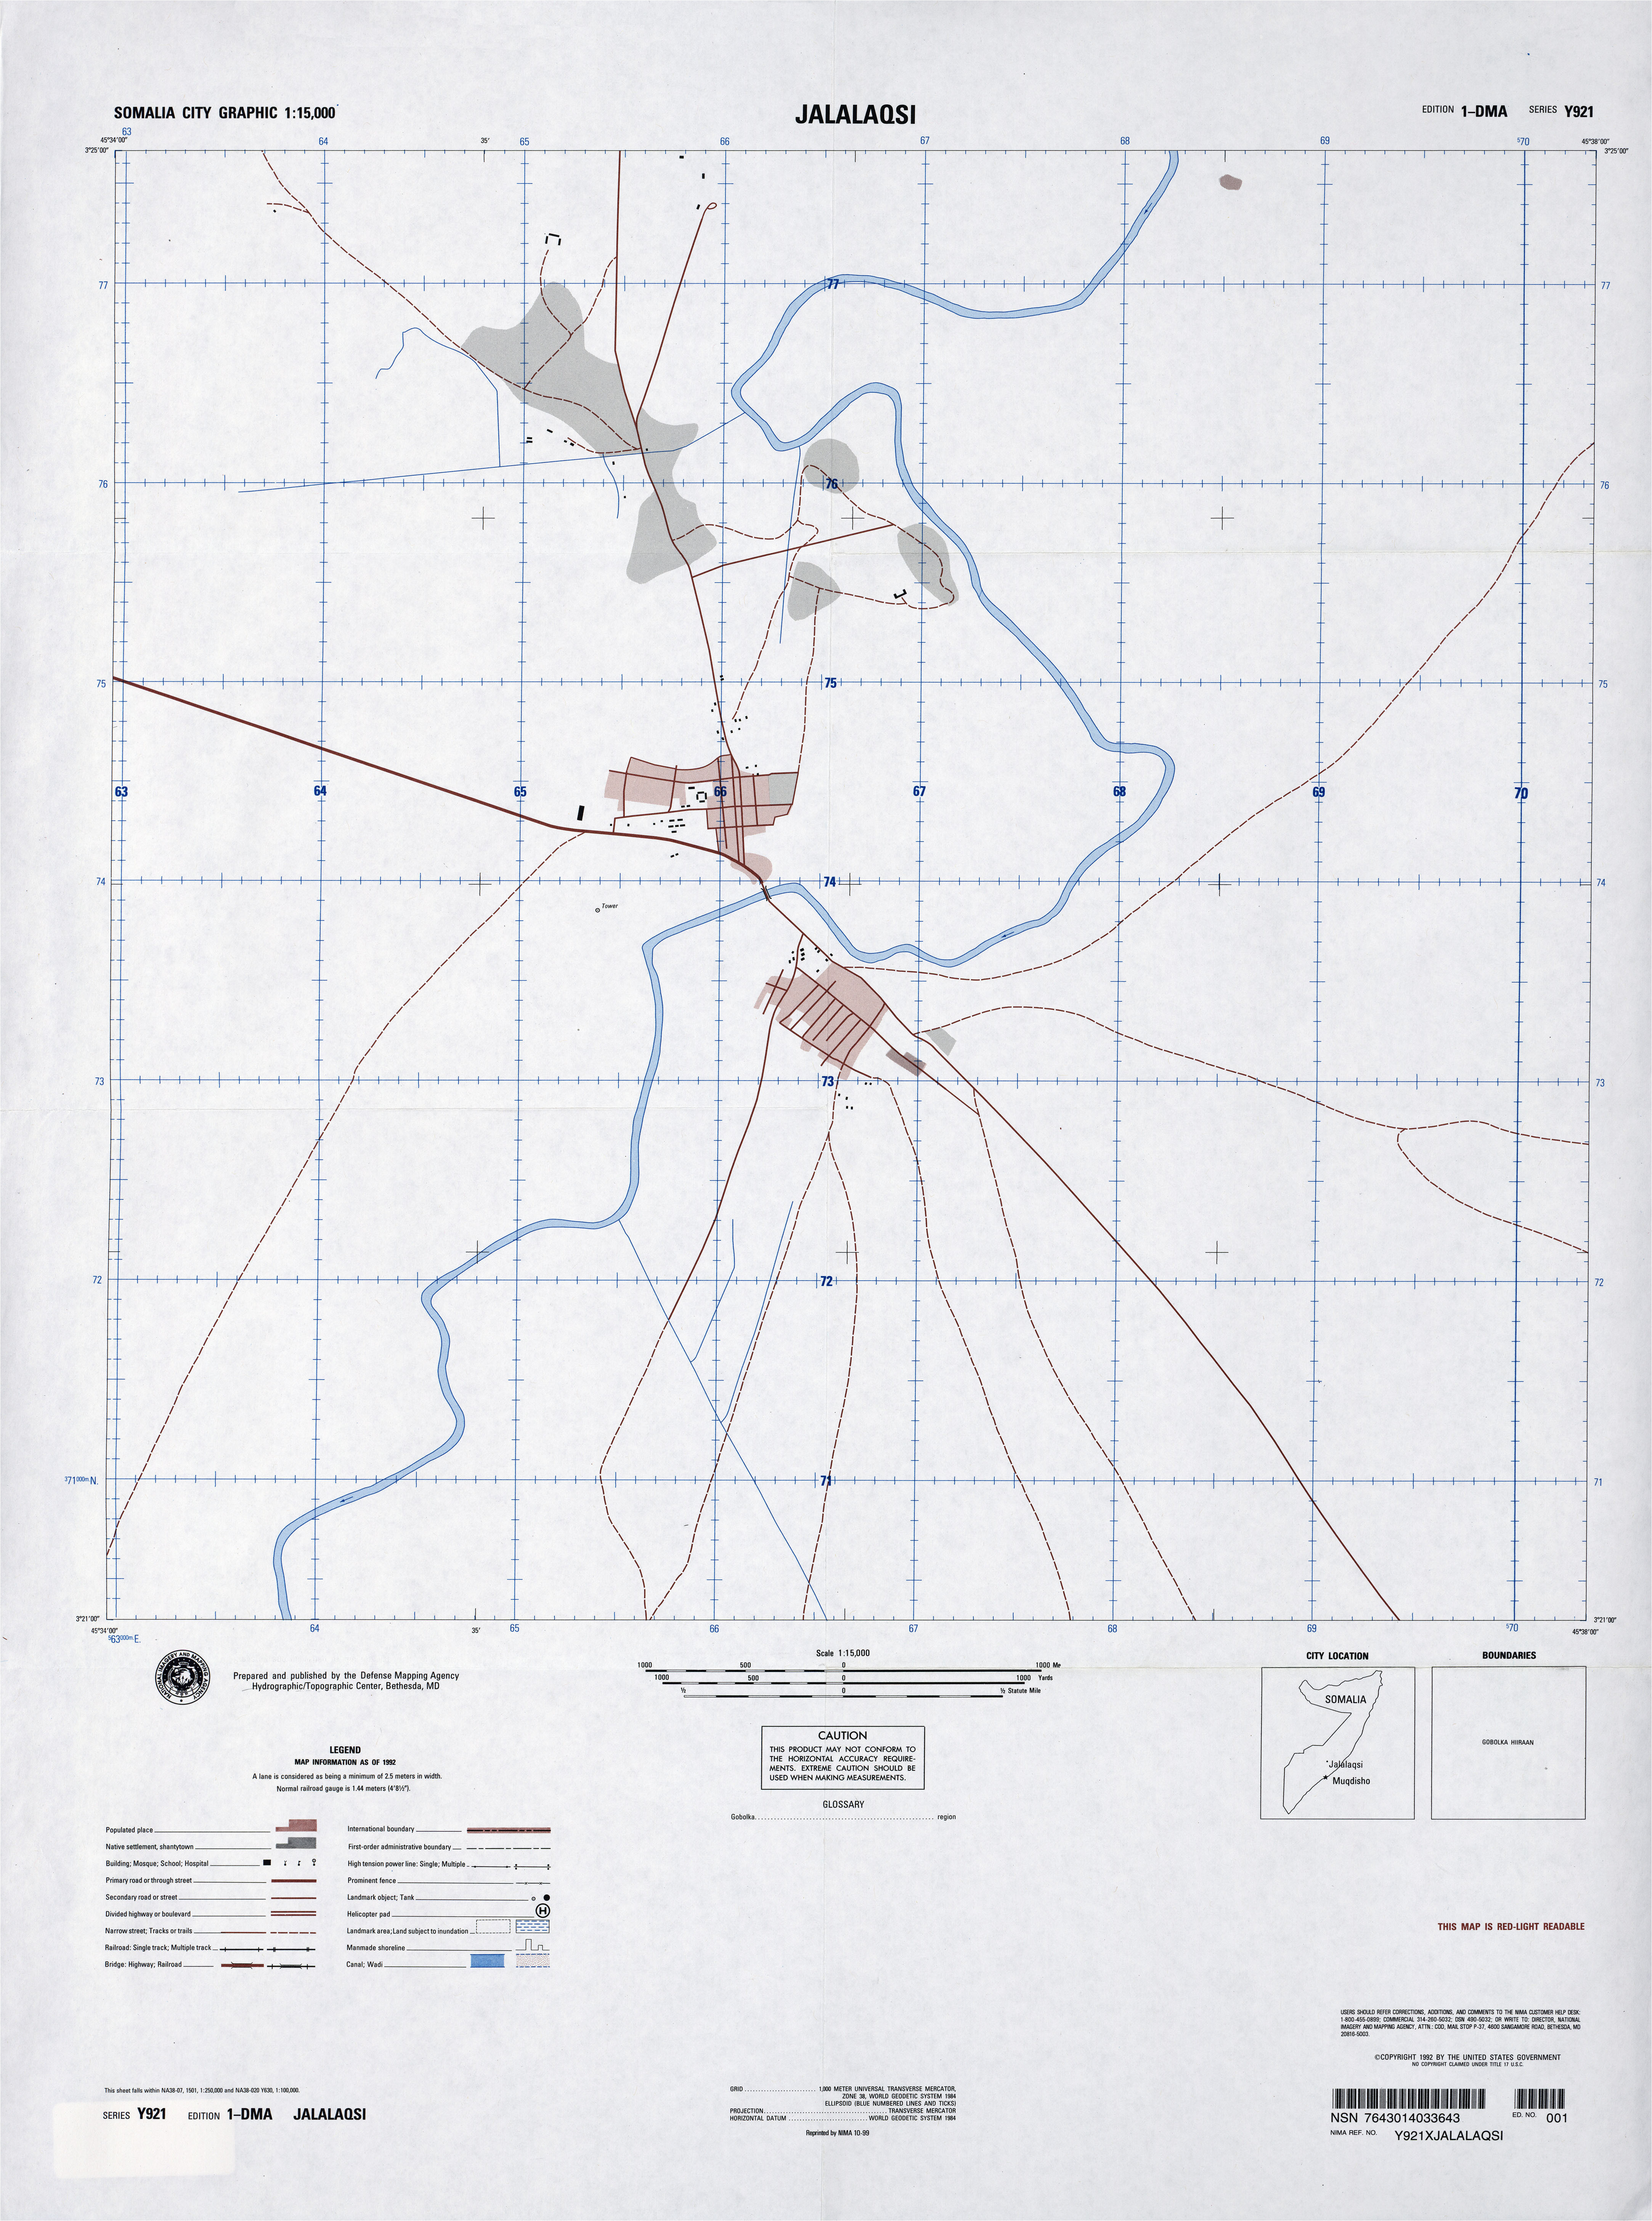 somalia maps perry castaa eda map collection ut library online